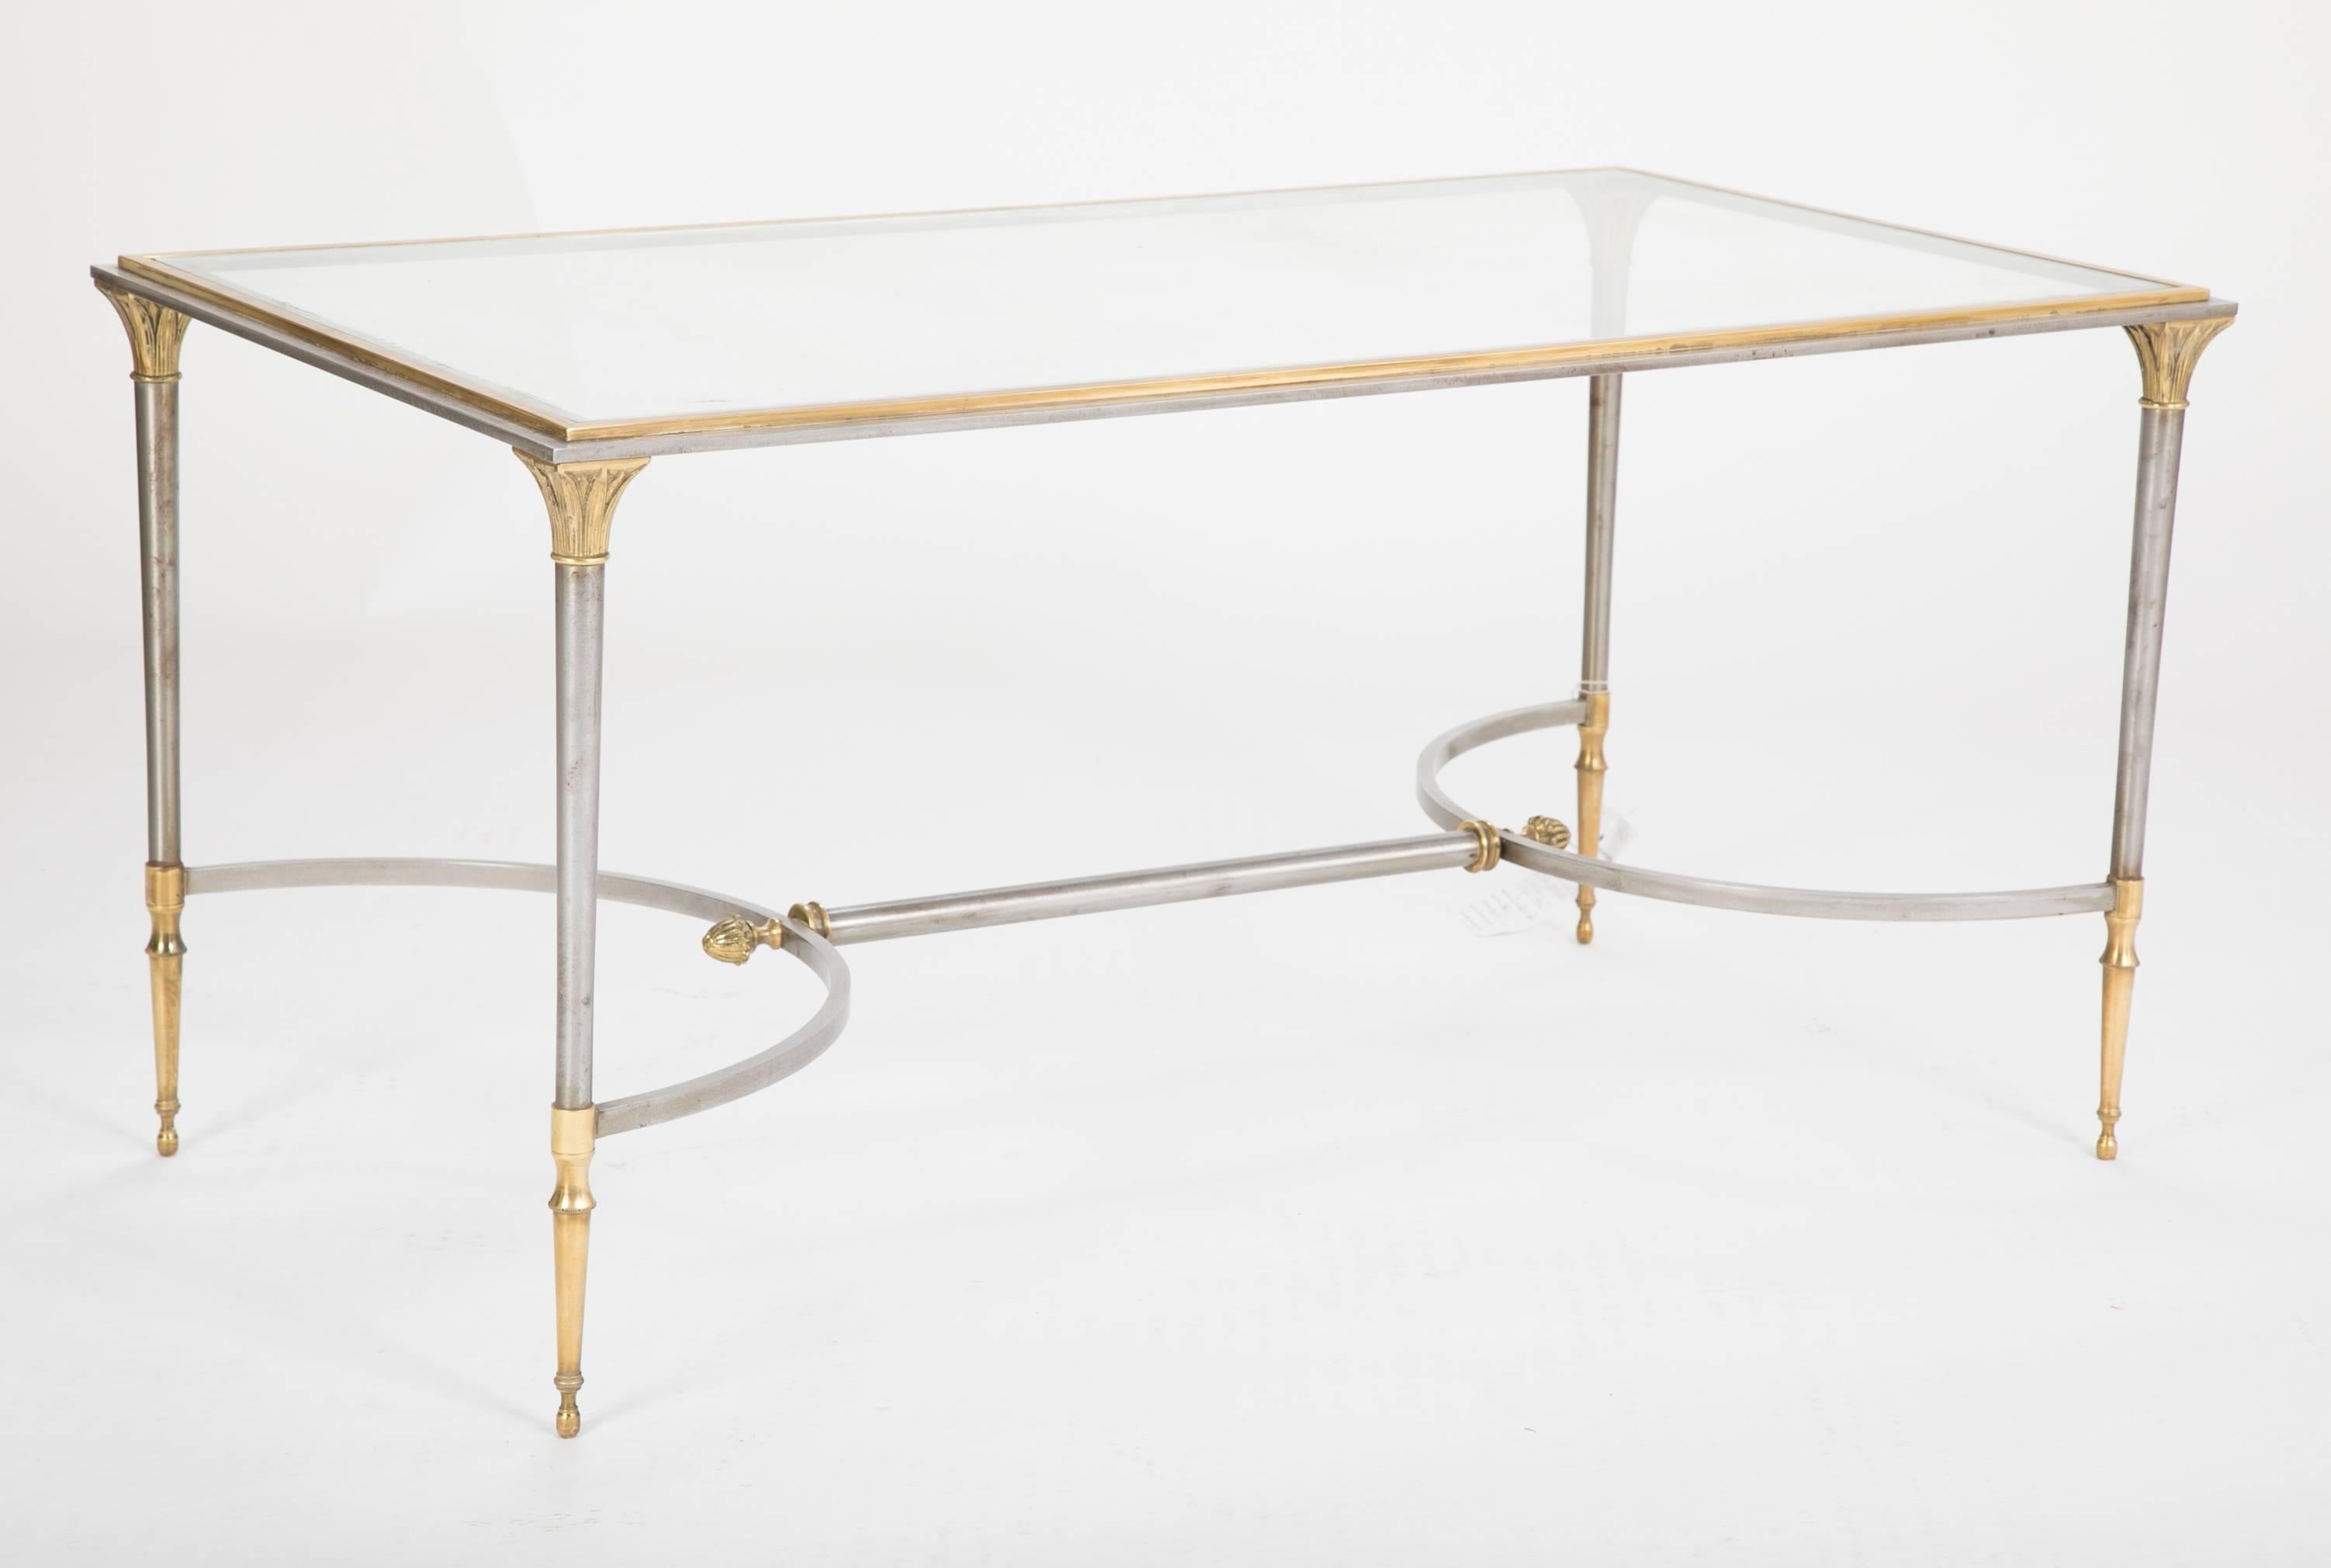 A steel and gilt bronze coffee table by Maison Charles with glass top.